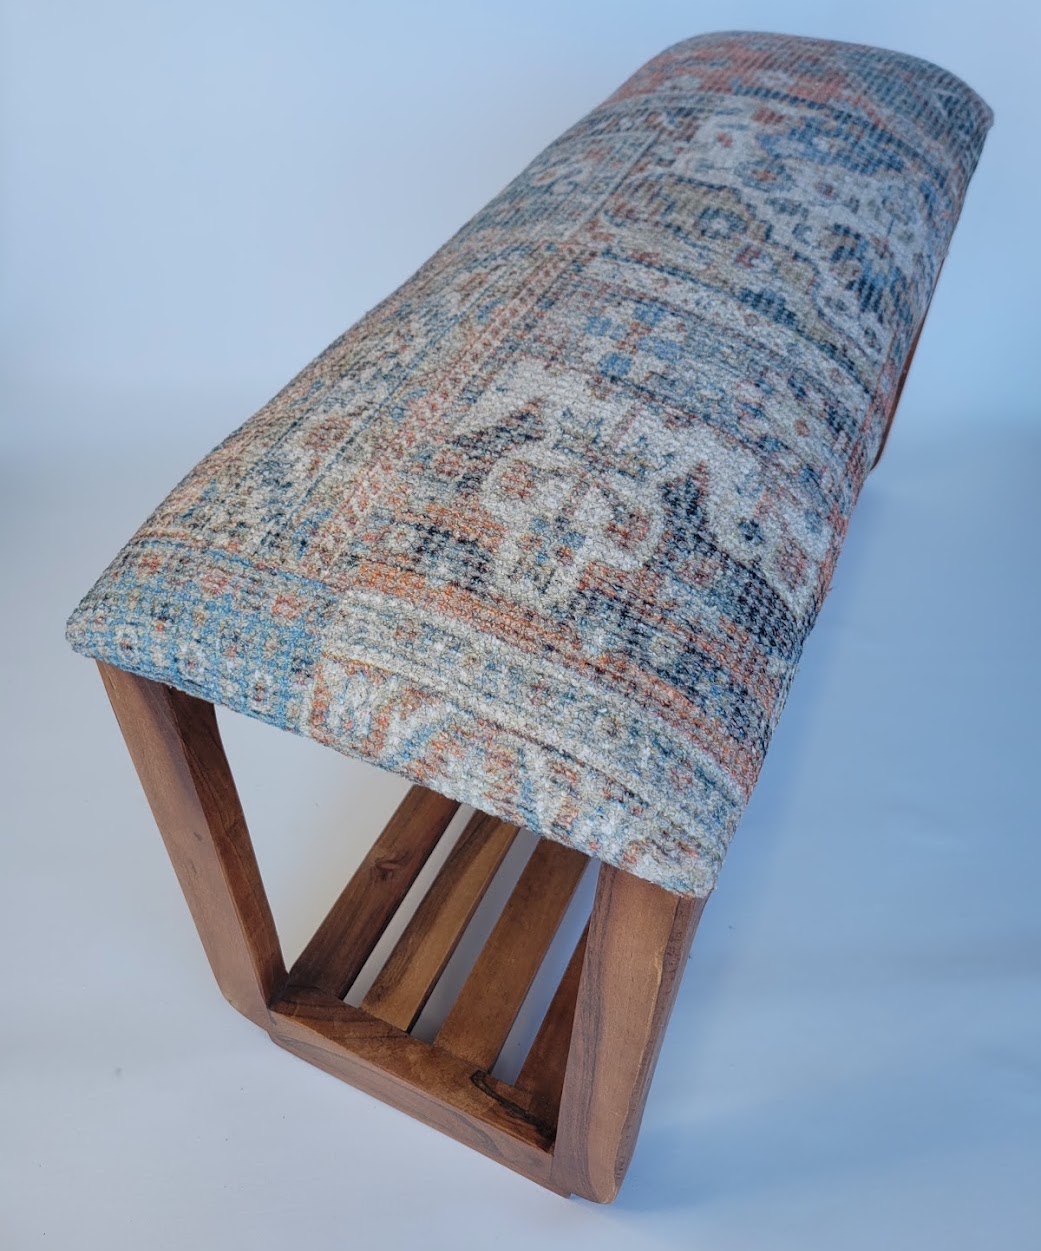 Wooden Bench with Patterned Cushion 